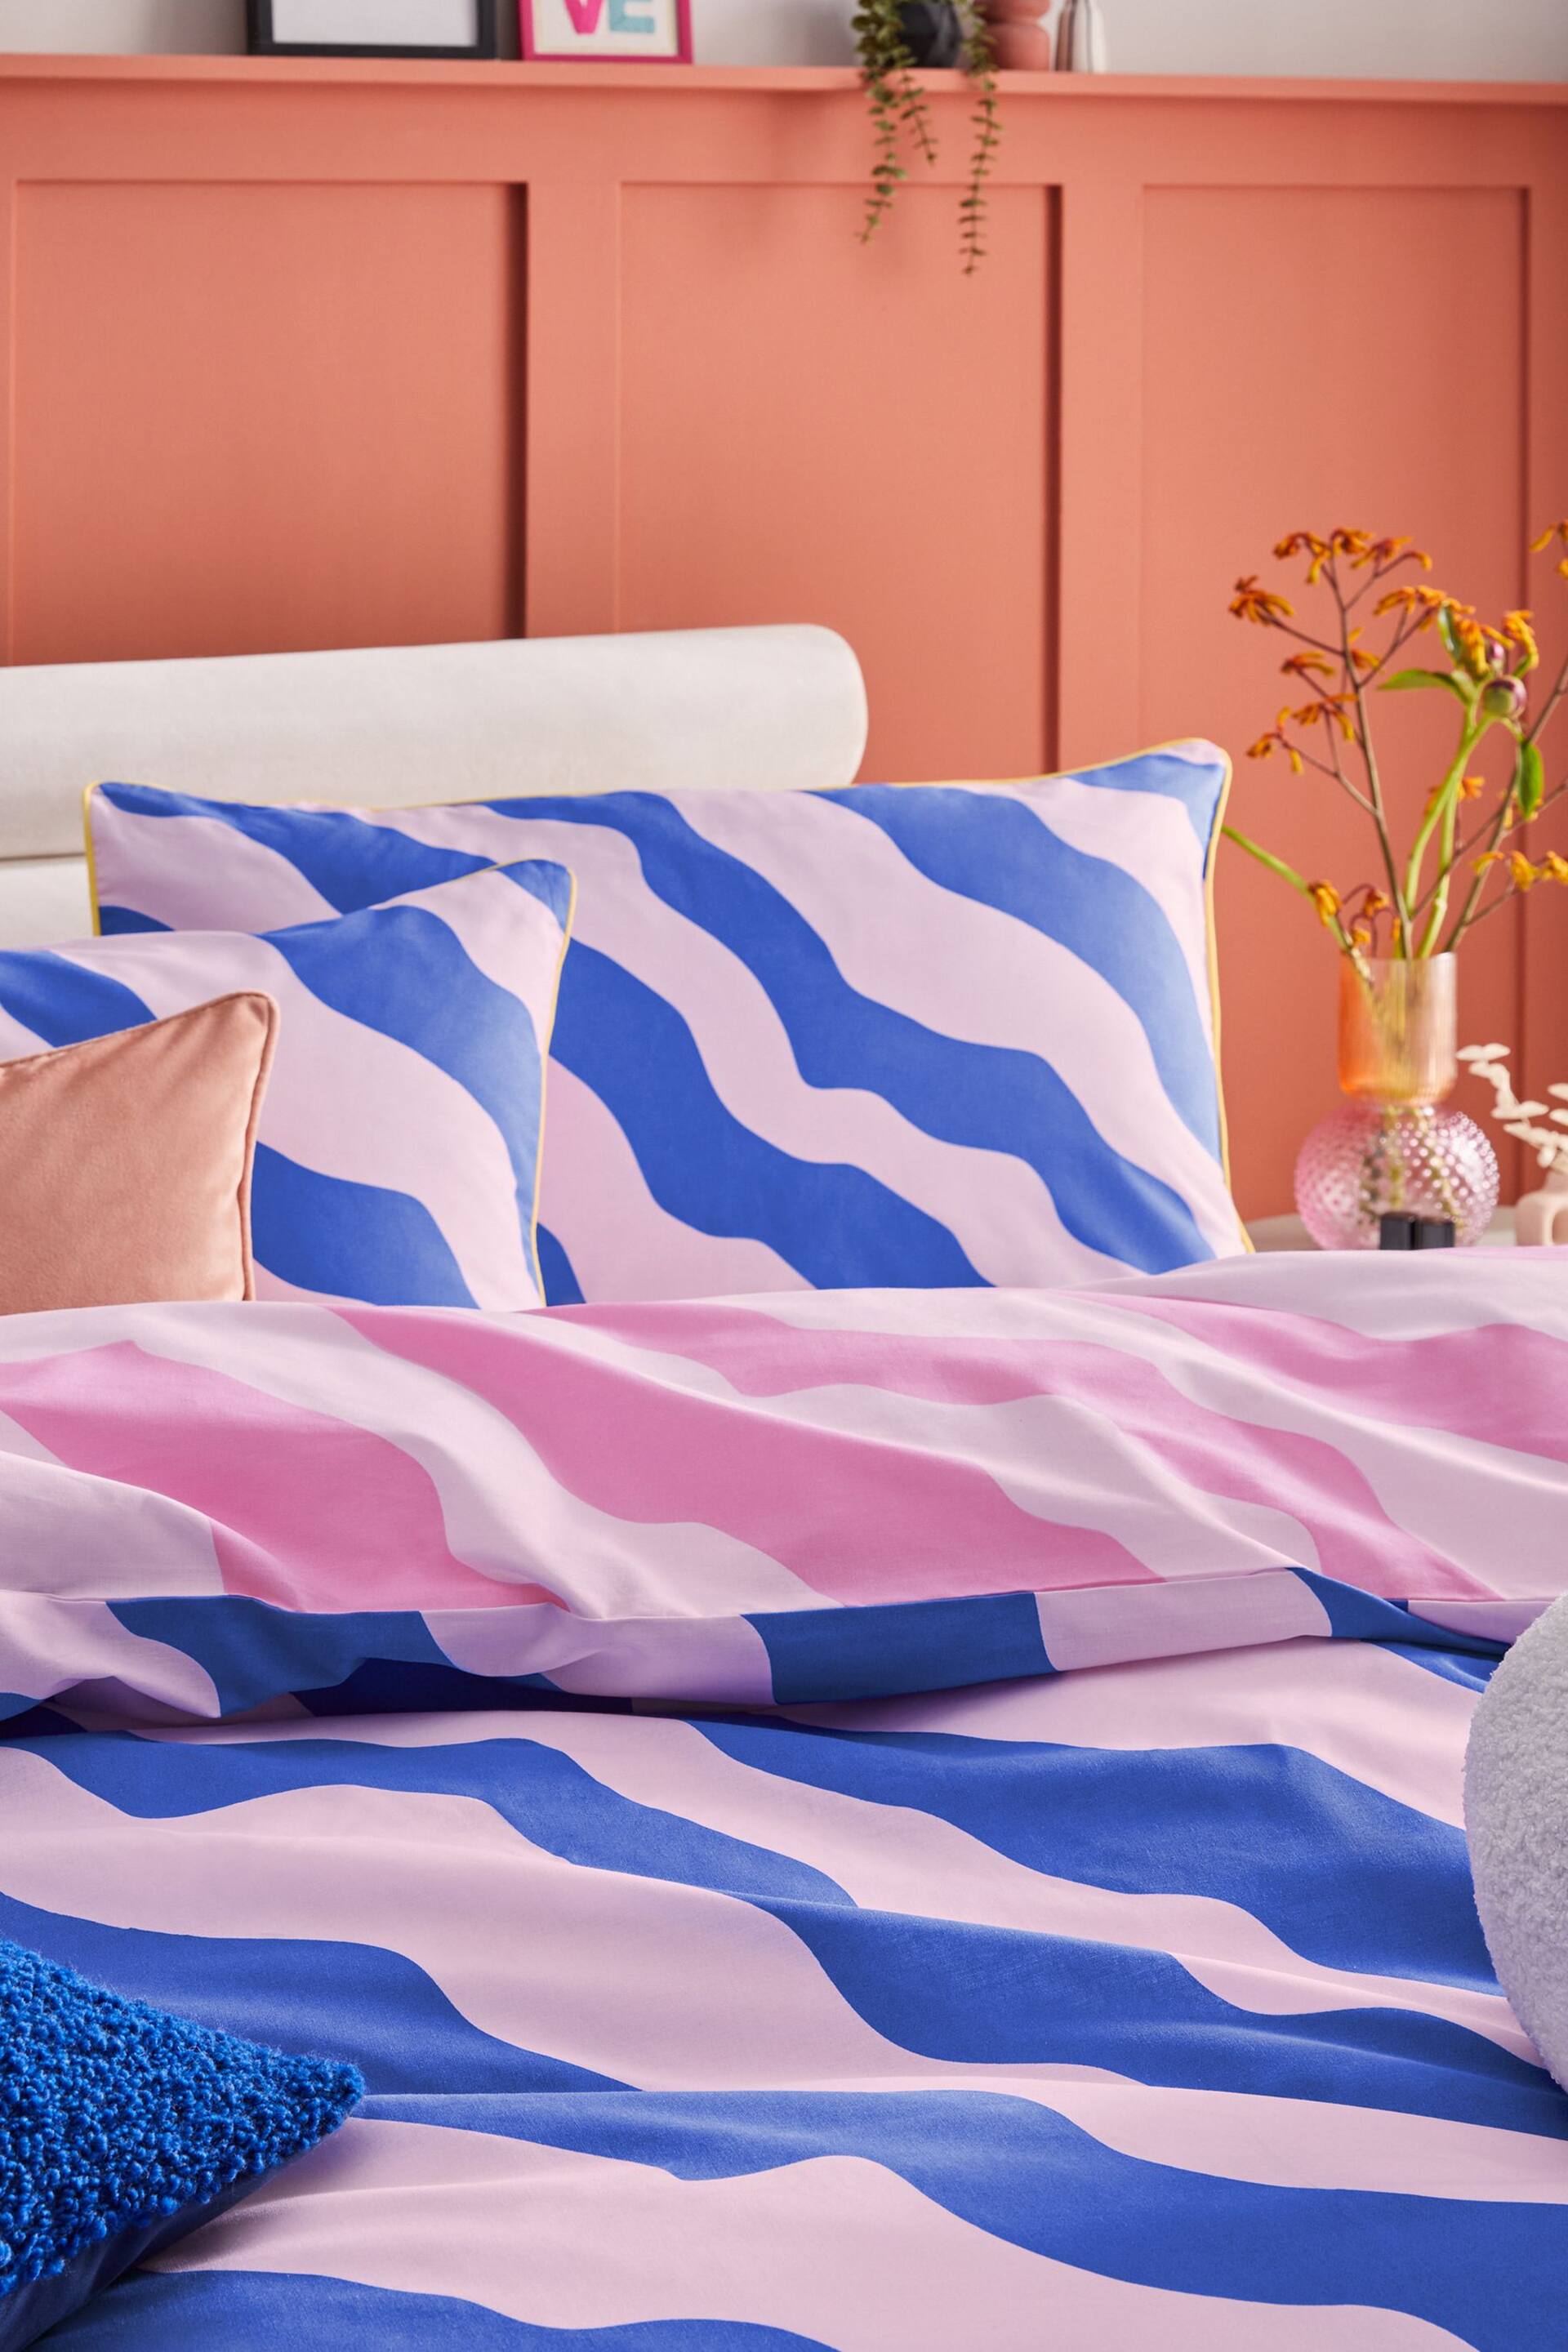 Blue/Pink Reversible Bright Wave with Pipe Edge Duvet Cover and Pillowcase Set - Image 3 of 3